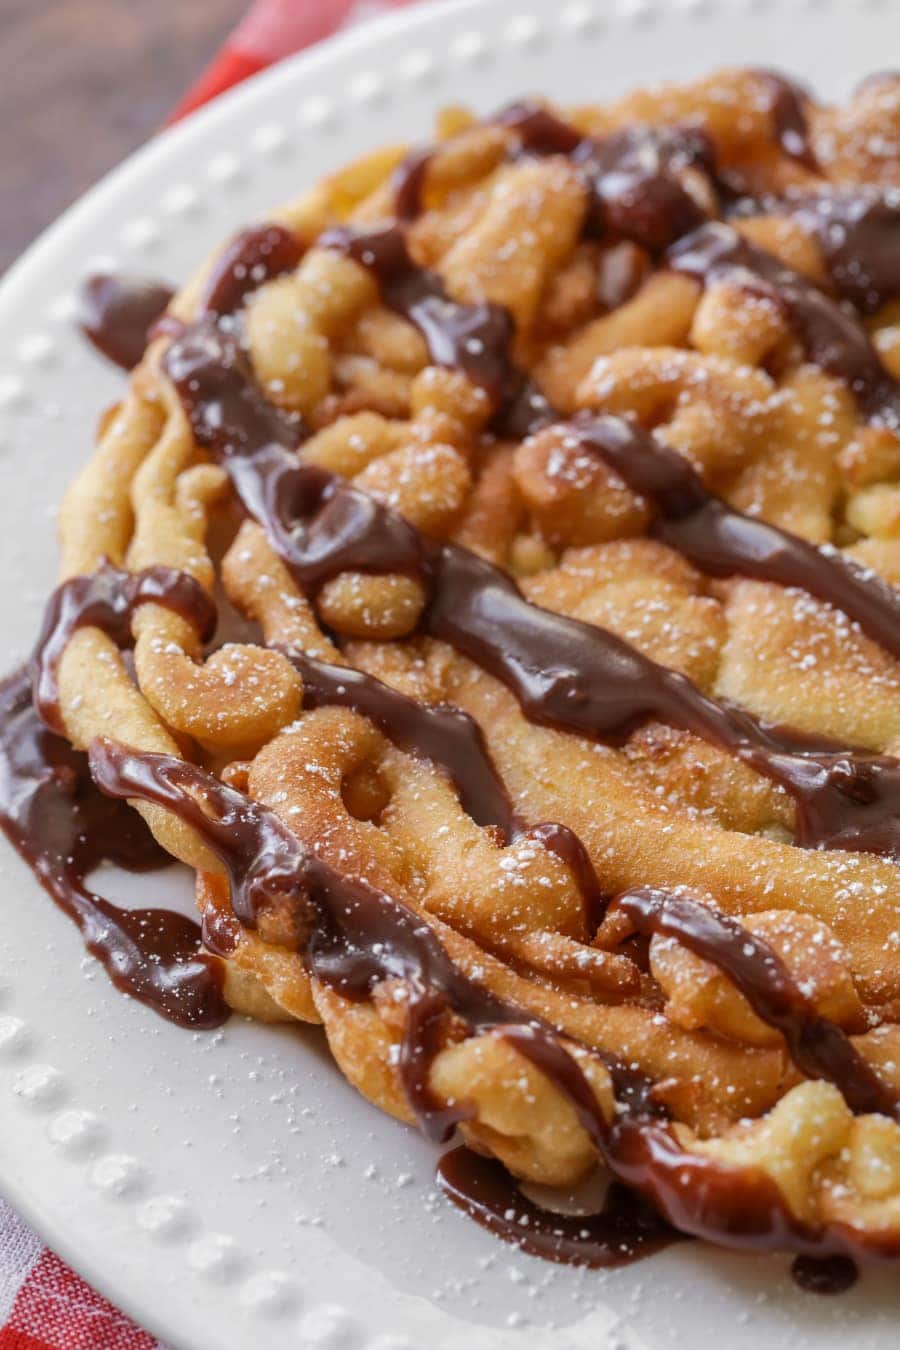 How to Make Funnel Cake - A Spicy Perspective